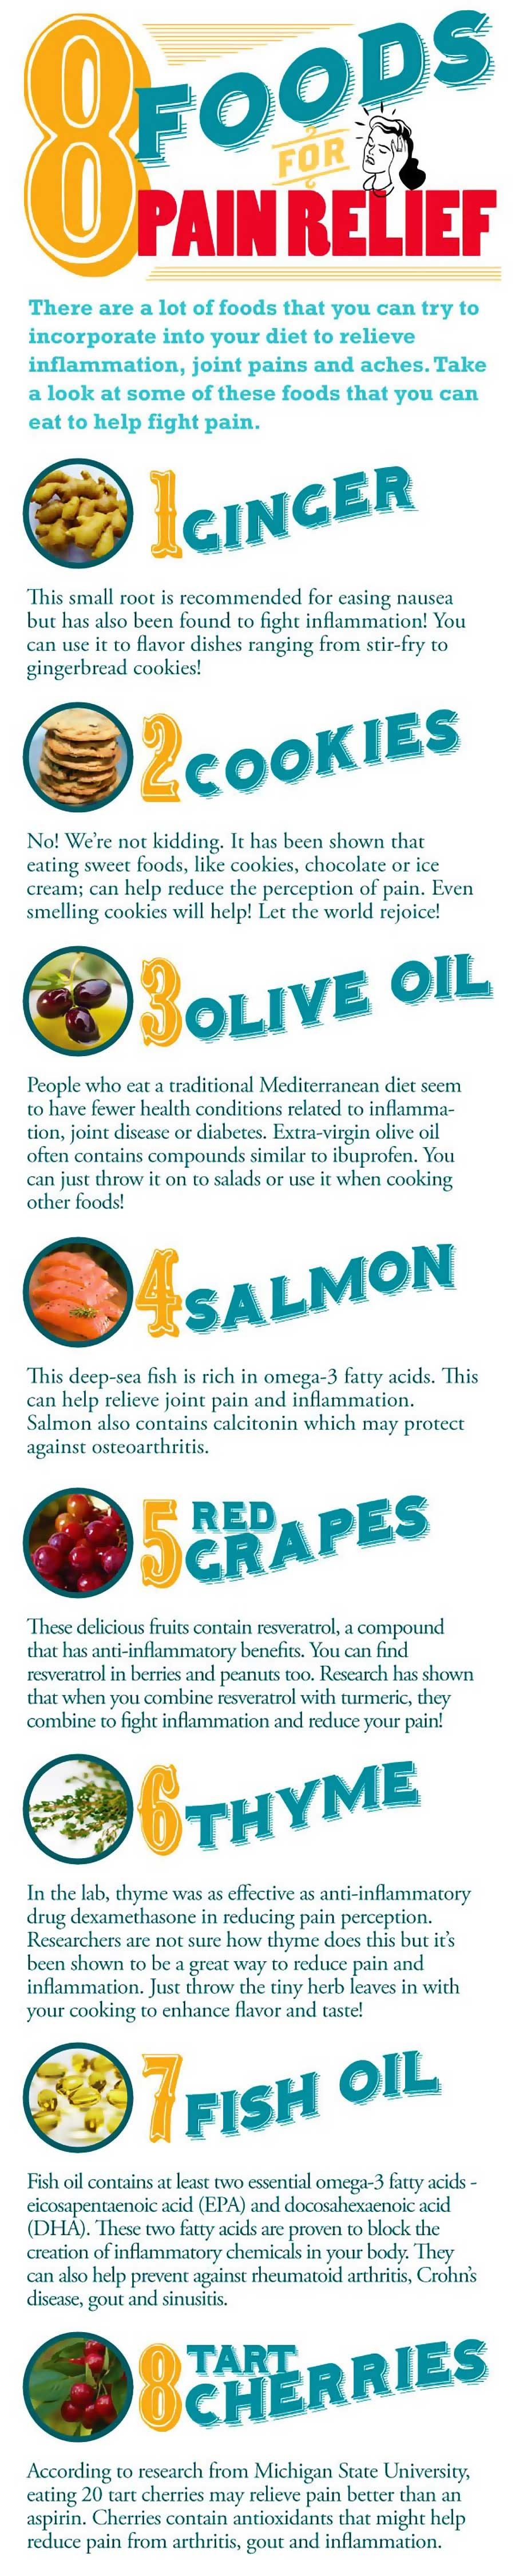 Foods For Pain Relief Infographic2